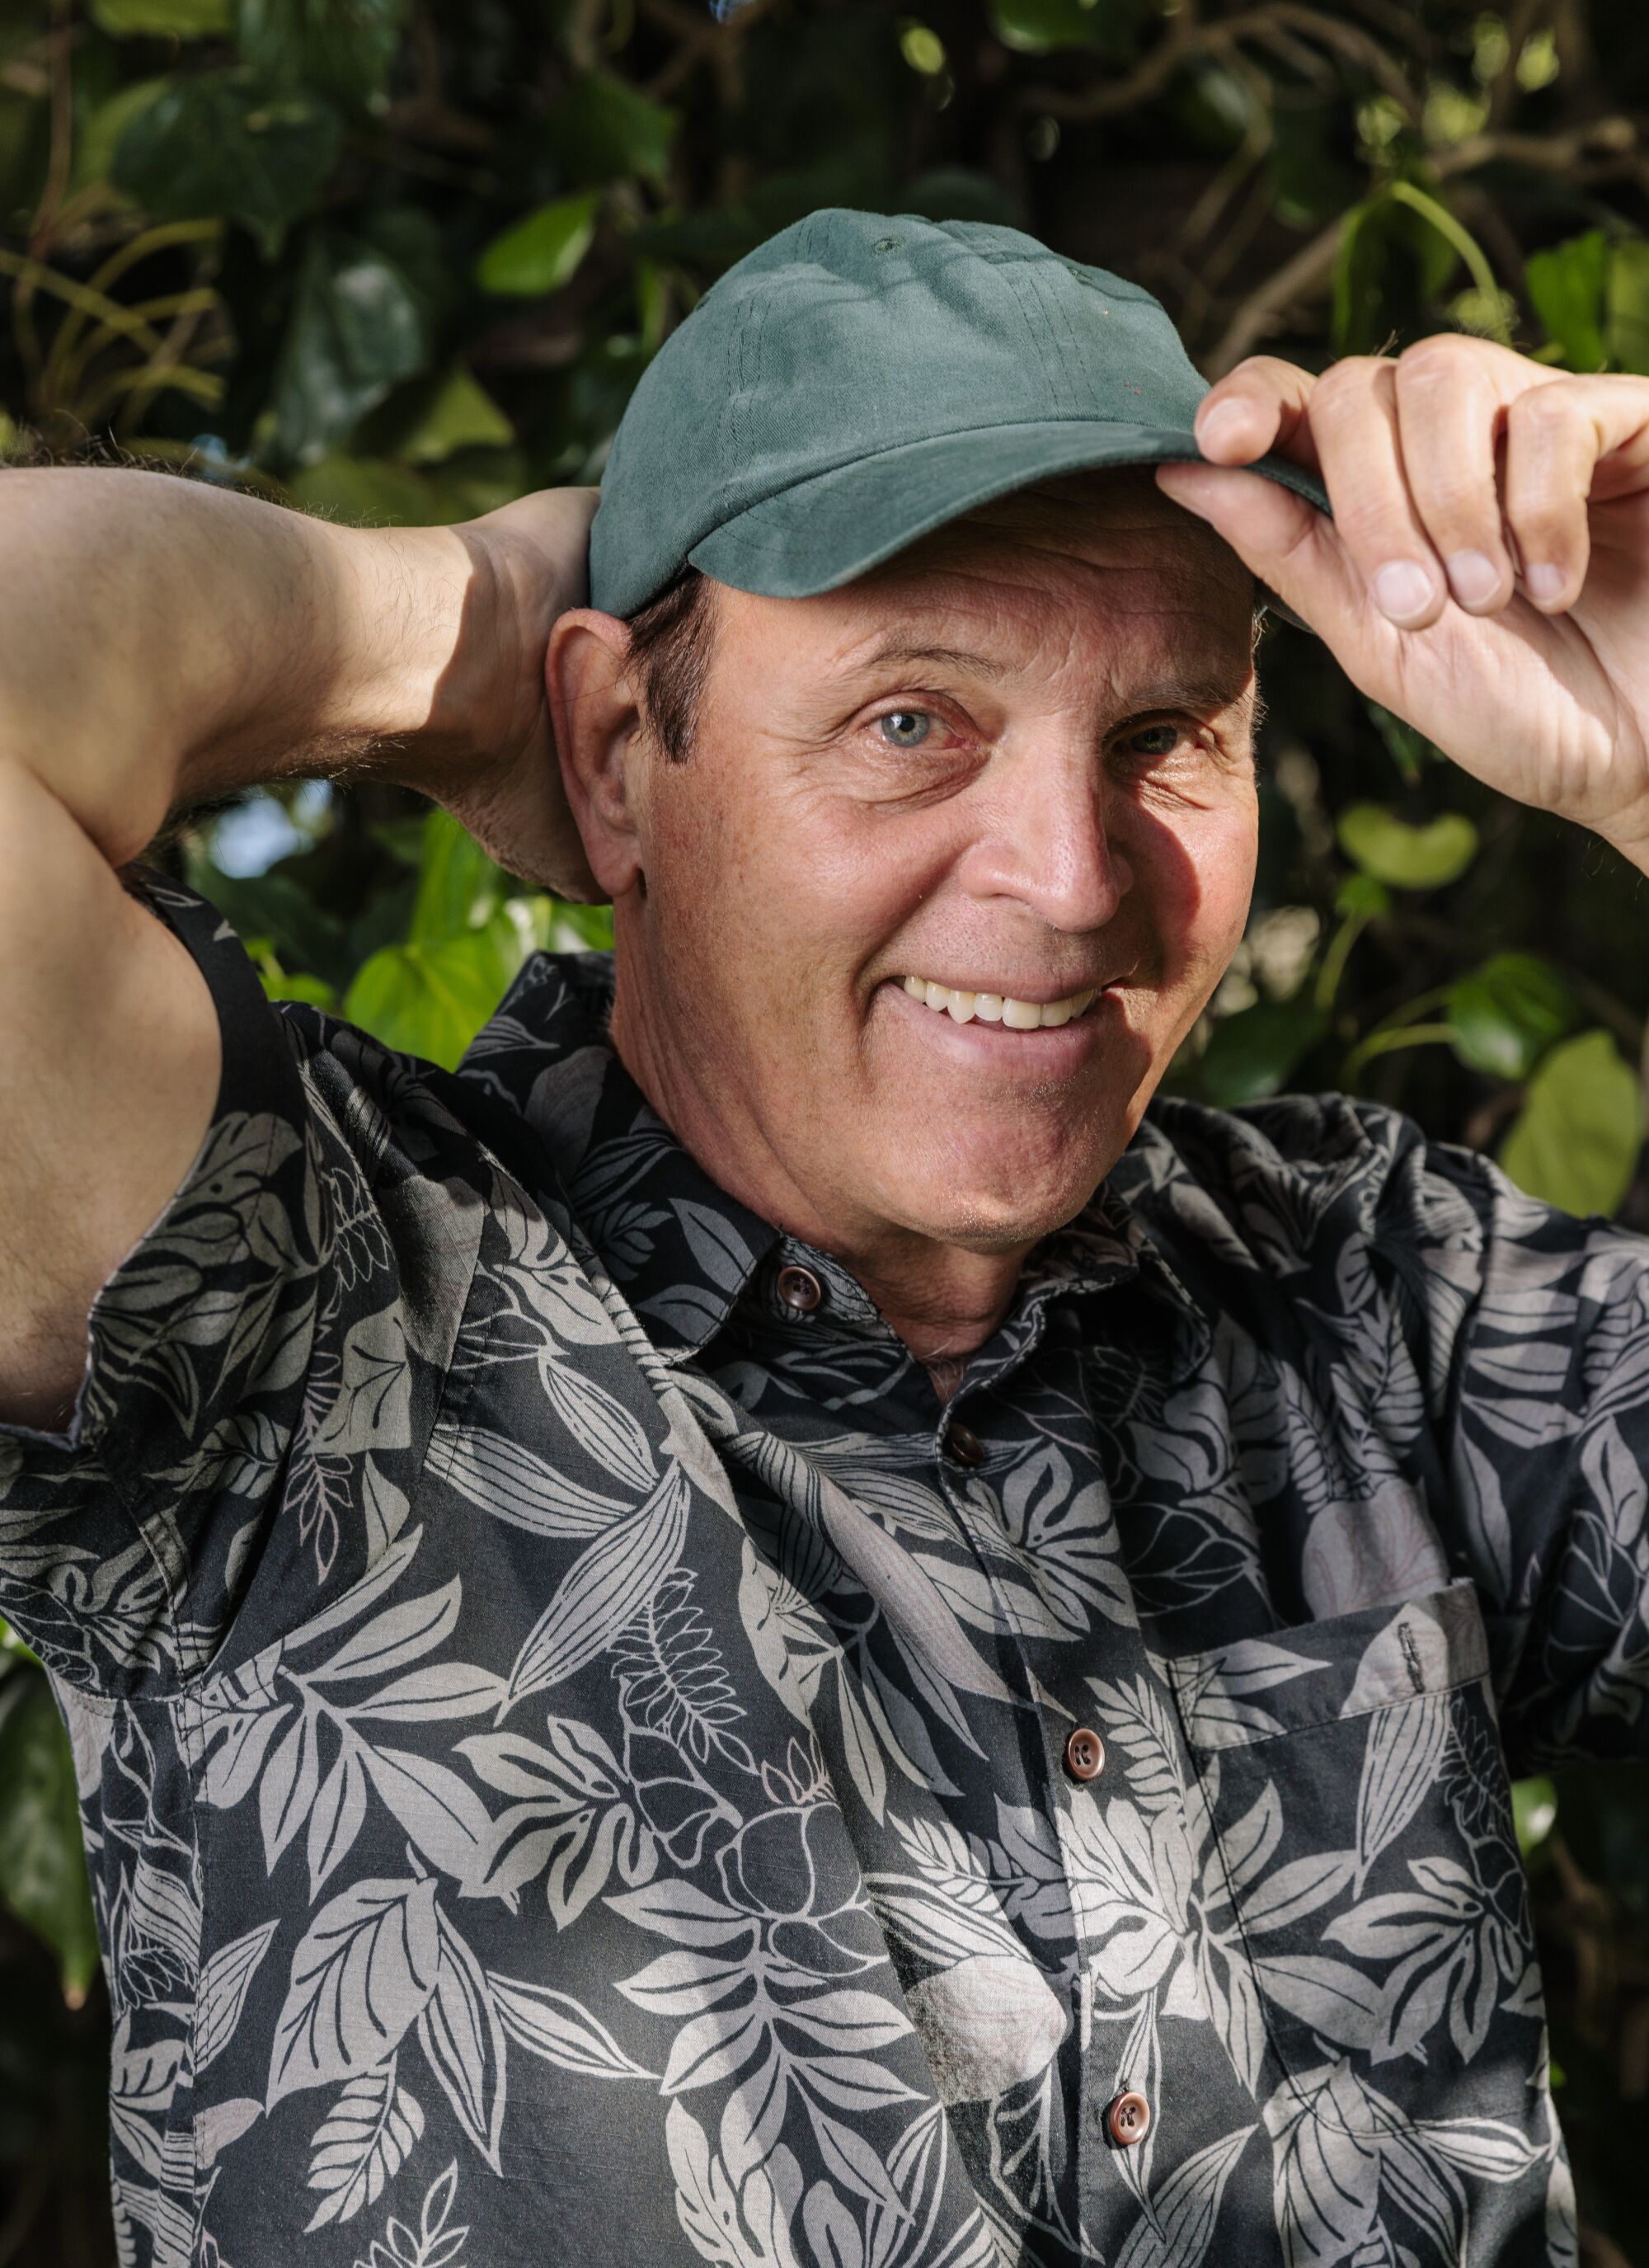 A man in a black floral shirt smiles and tips his cap